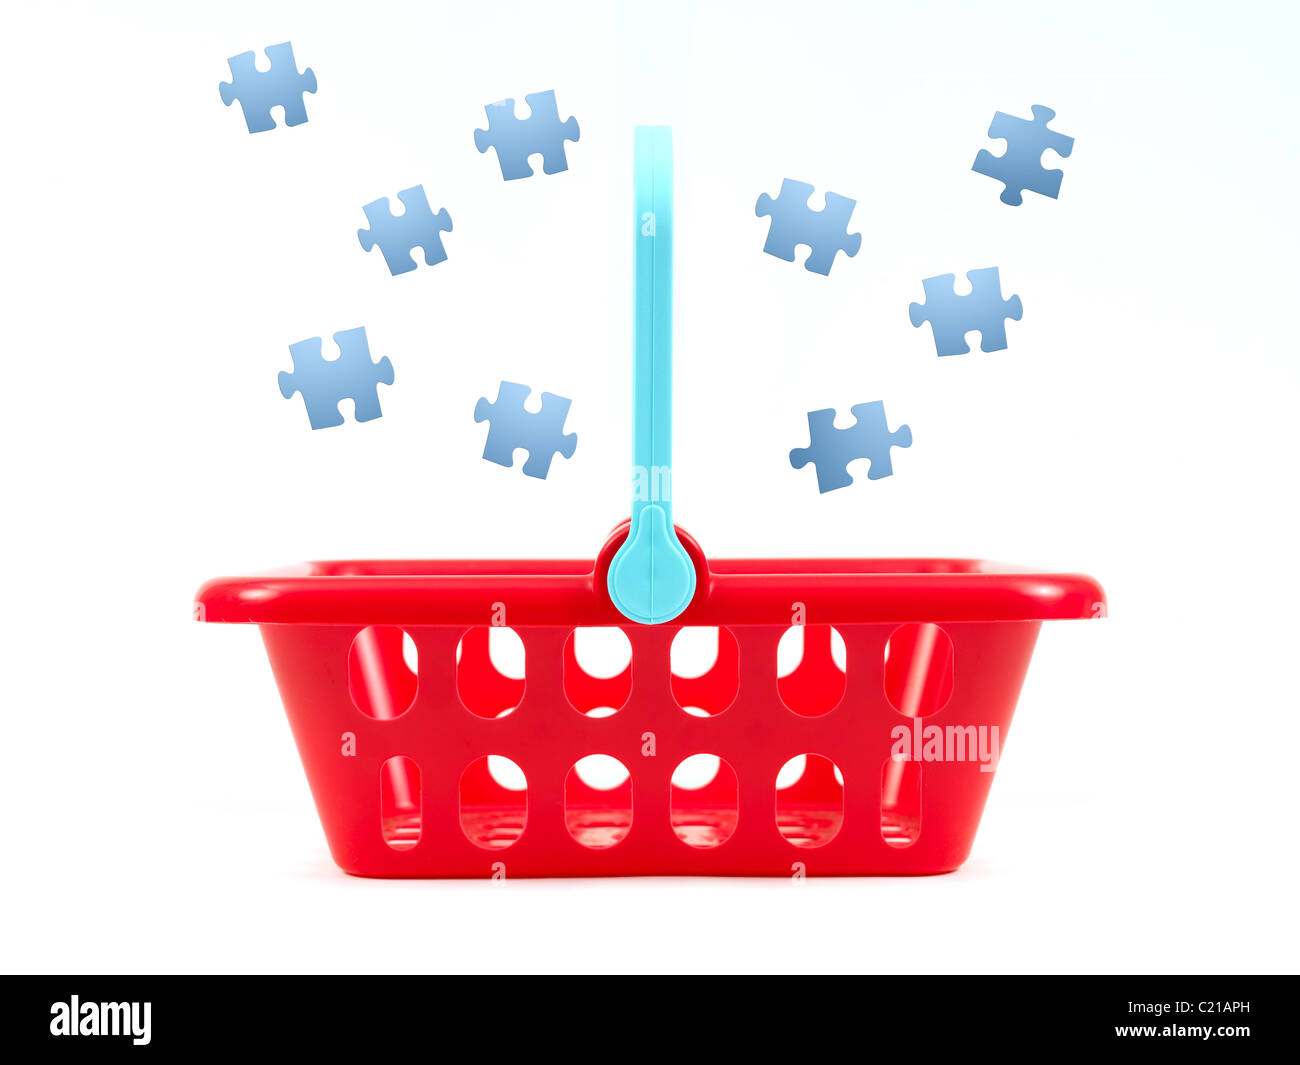 Jigsaw pieces falling into a shopping basket isolated against a white background Stock Photo